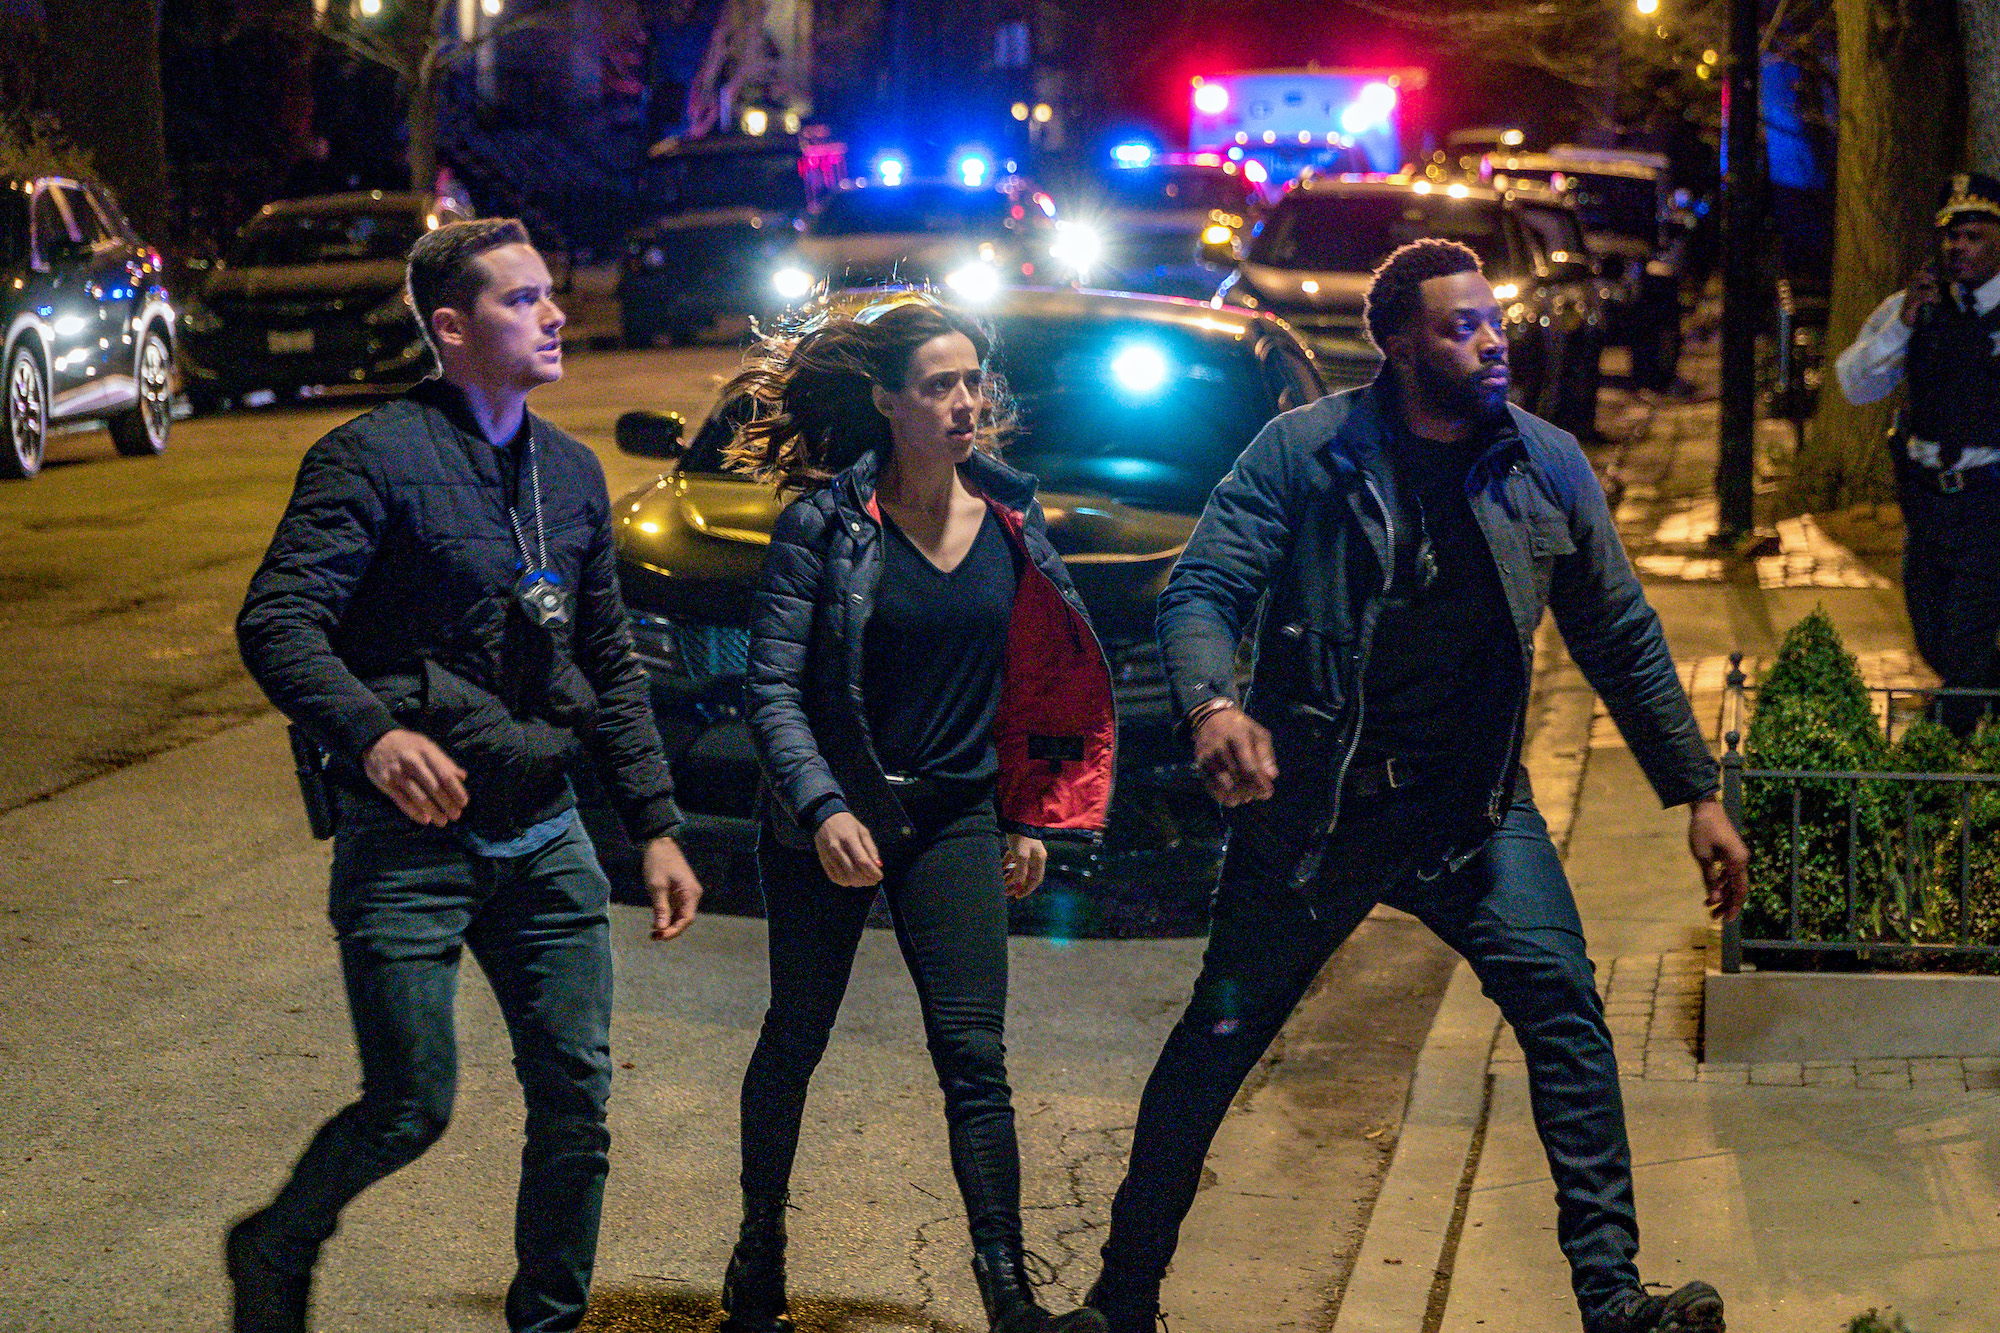 (L-R) Jesse Lee Soffer as Det. Jay Halstead, Marina Squerciati as Officer Kim Burgess, LaRoyce Hawkins as Officer Kevin Atwater